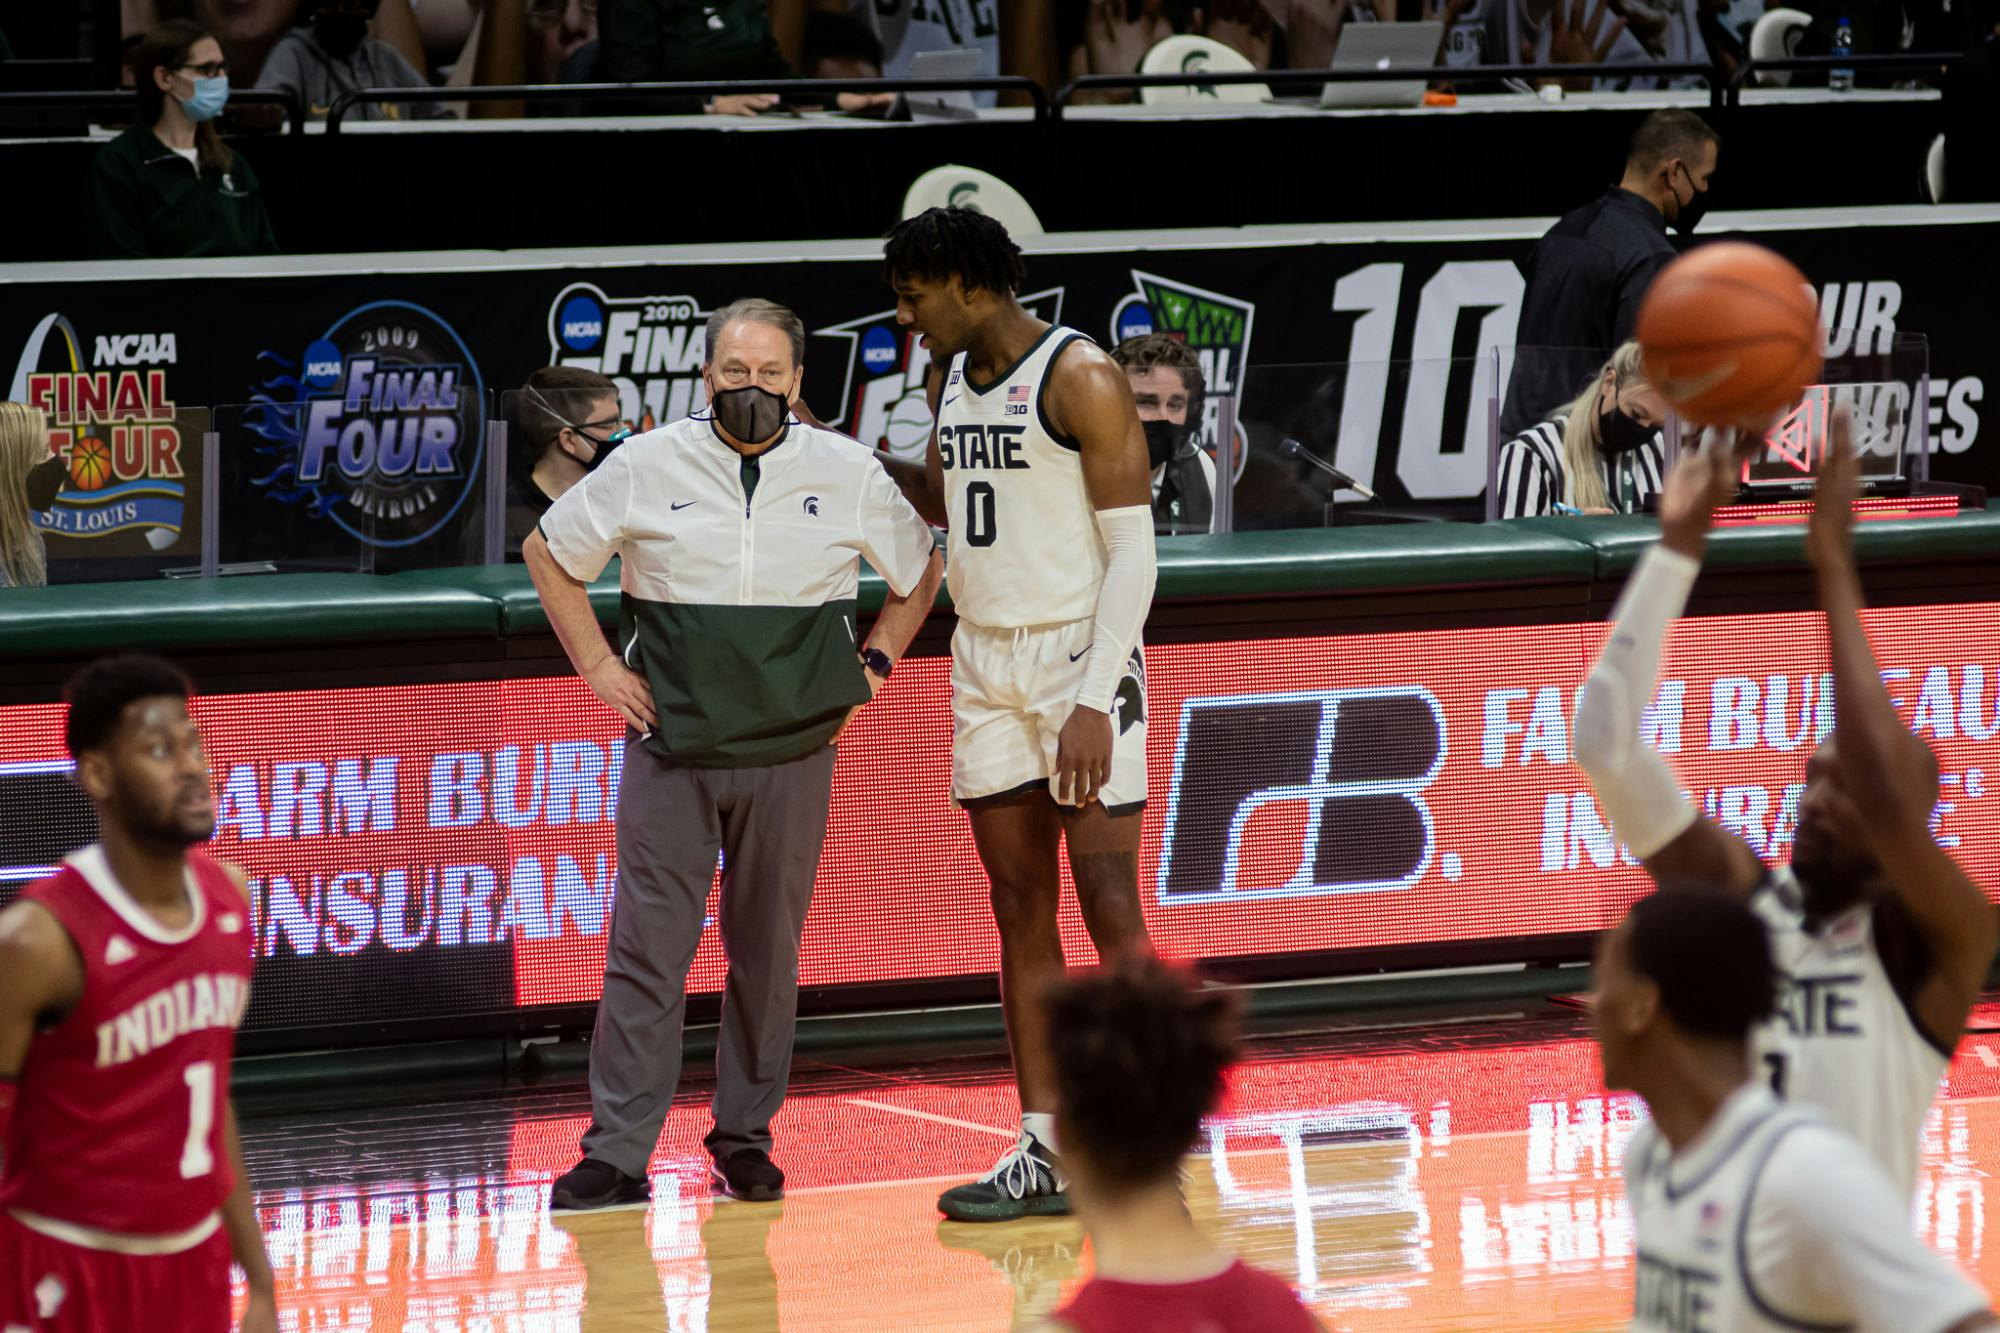 Junior forward Aaron Henry talks to Michigan State head coach Tom Izzo as redshirt senior guard Joshua Langford shoots a free throw. The Spartans defeated the Hoosiers 64-58 on Mar. 2, 2021.